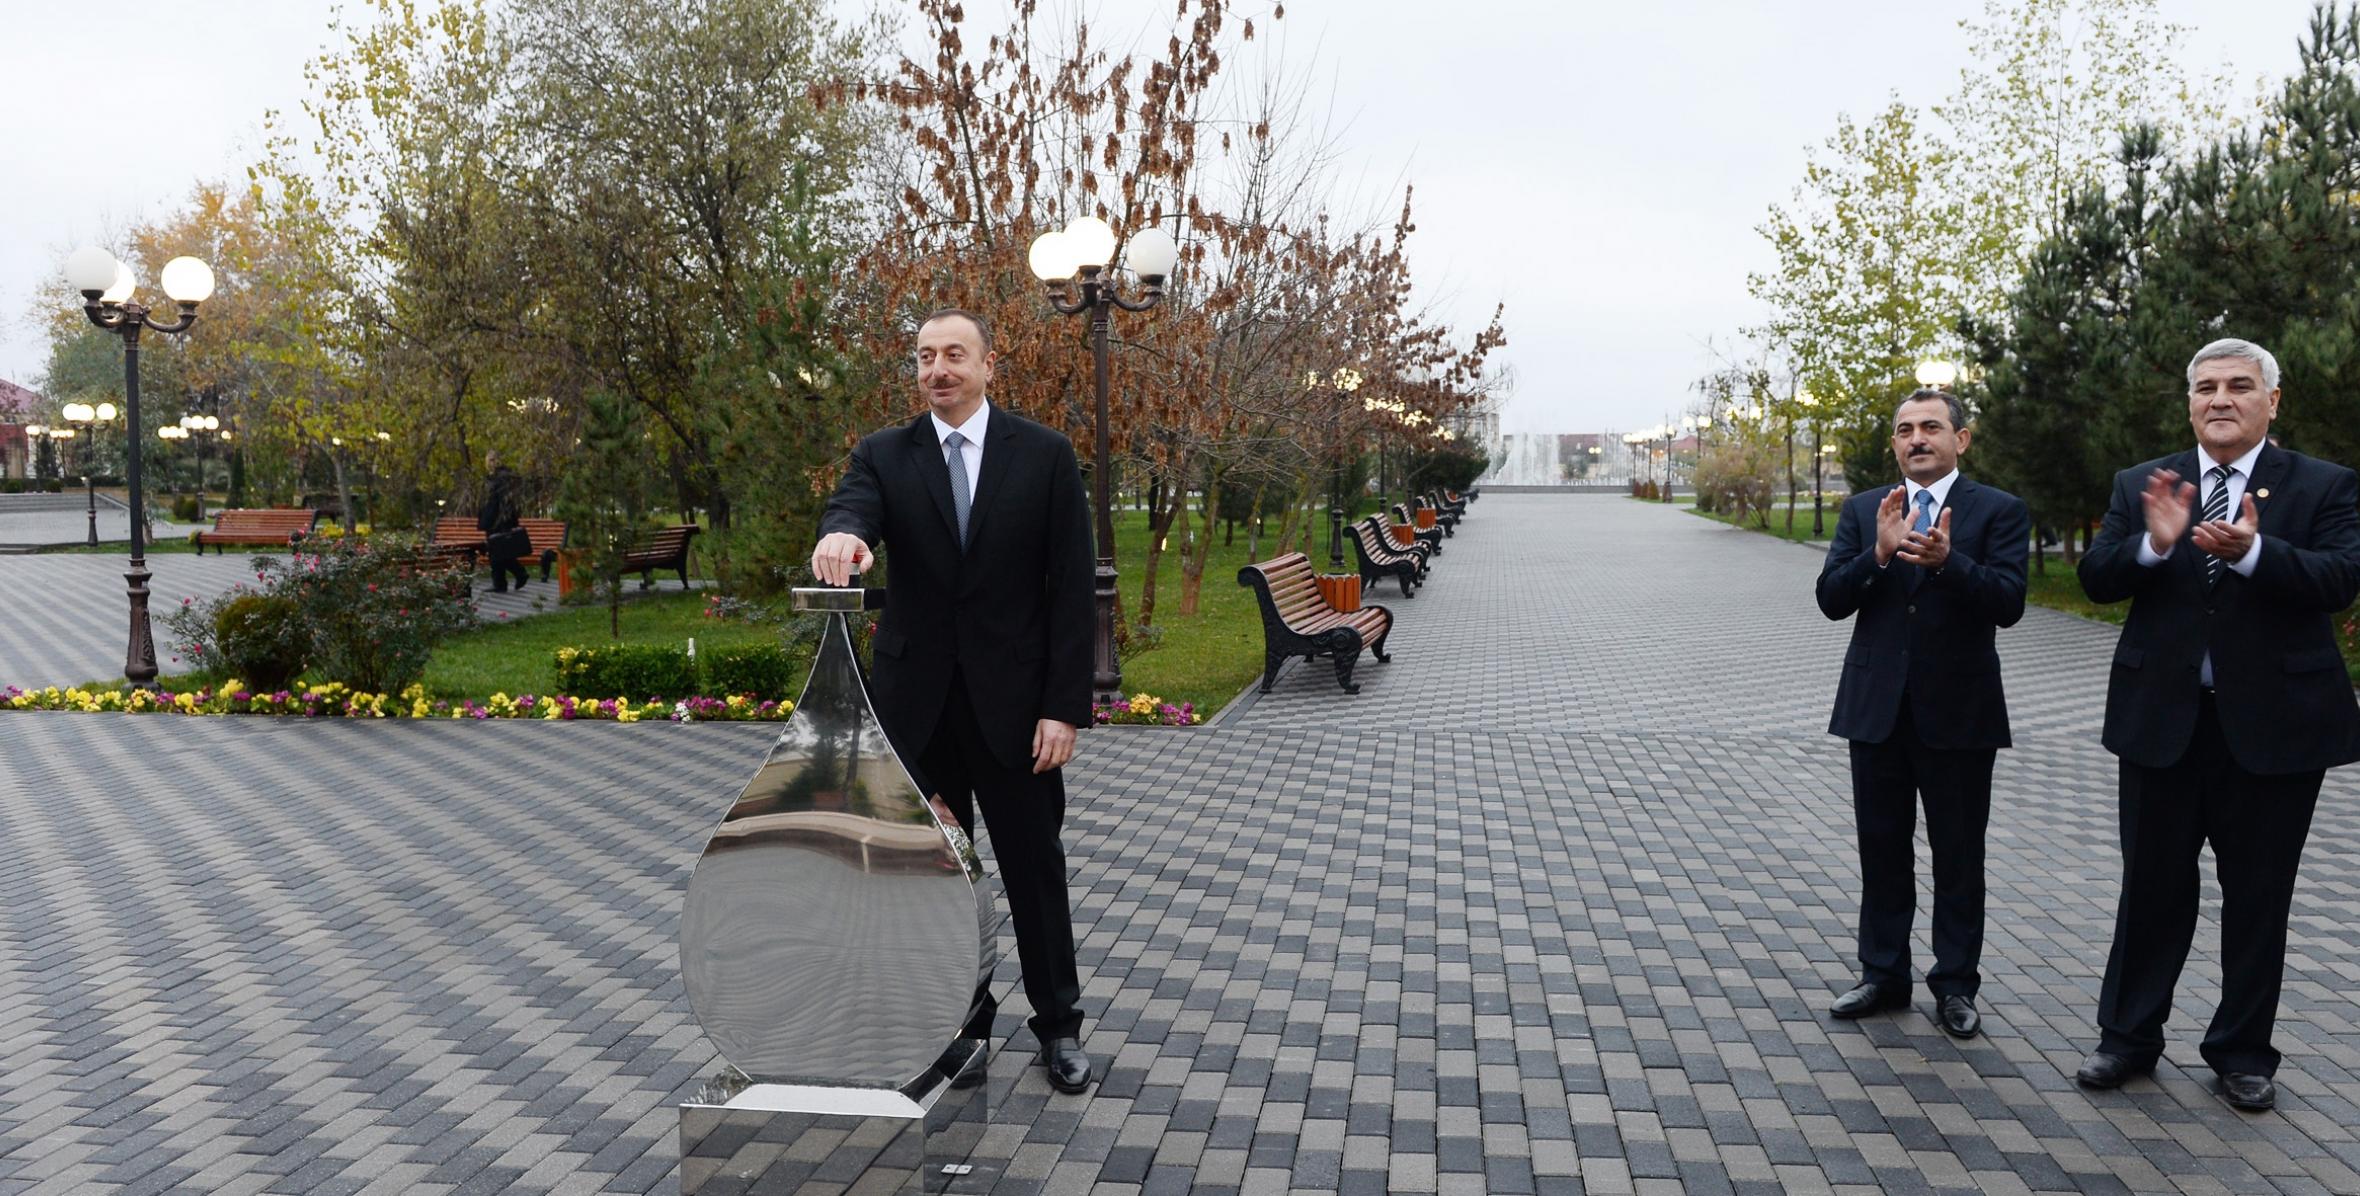 Ilham Aliyev attended a ceremony to start supply of drinking water to the city of Sabirabad